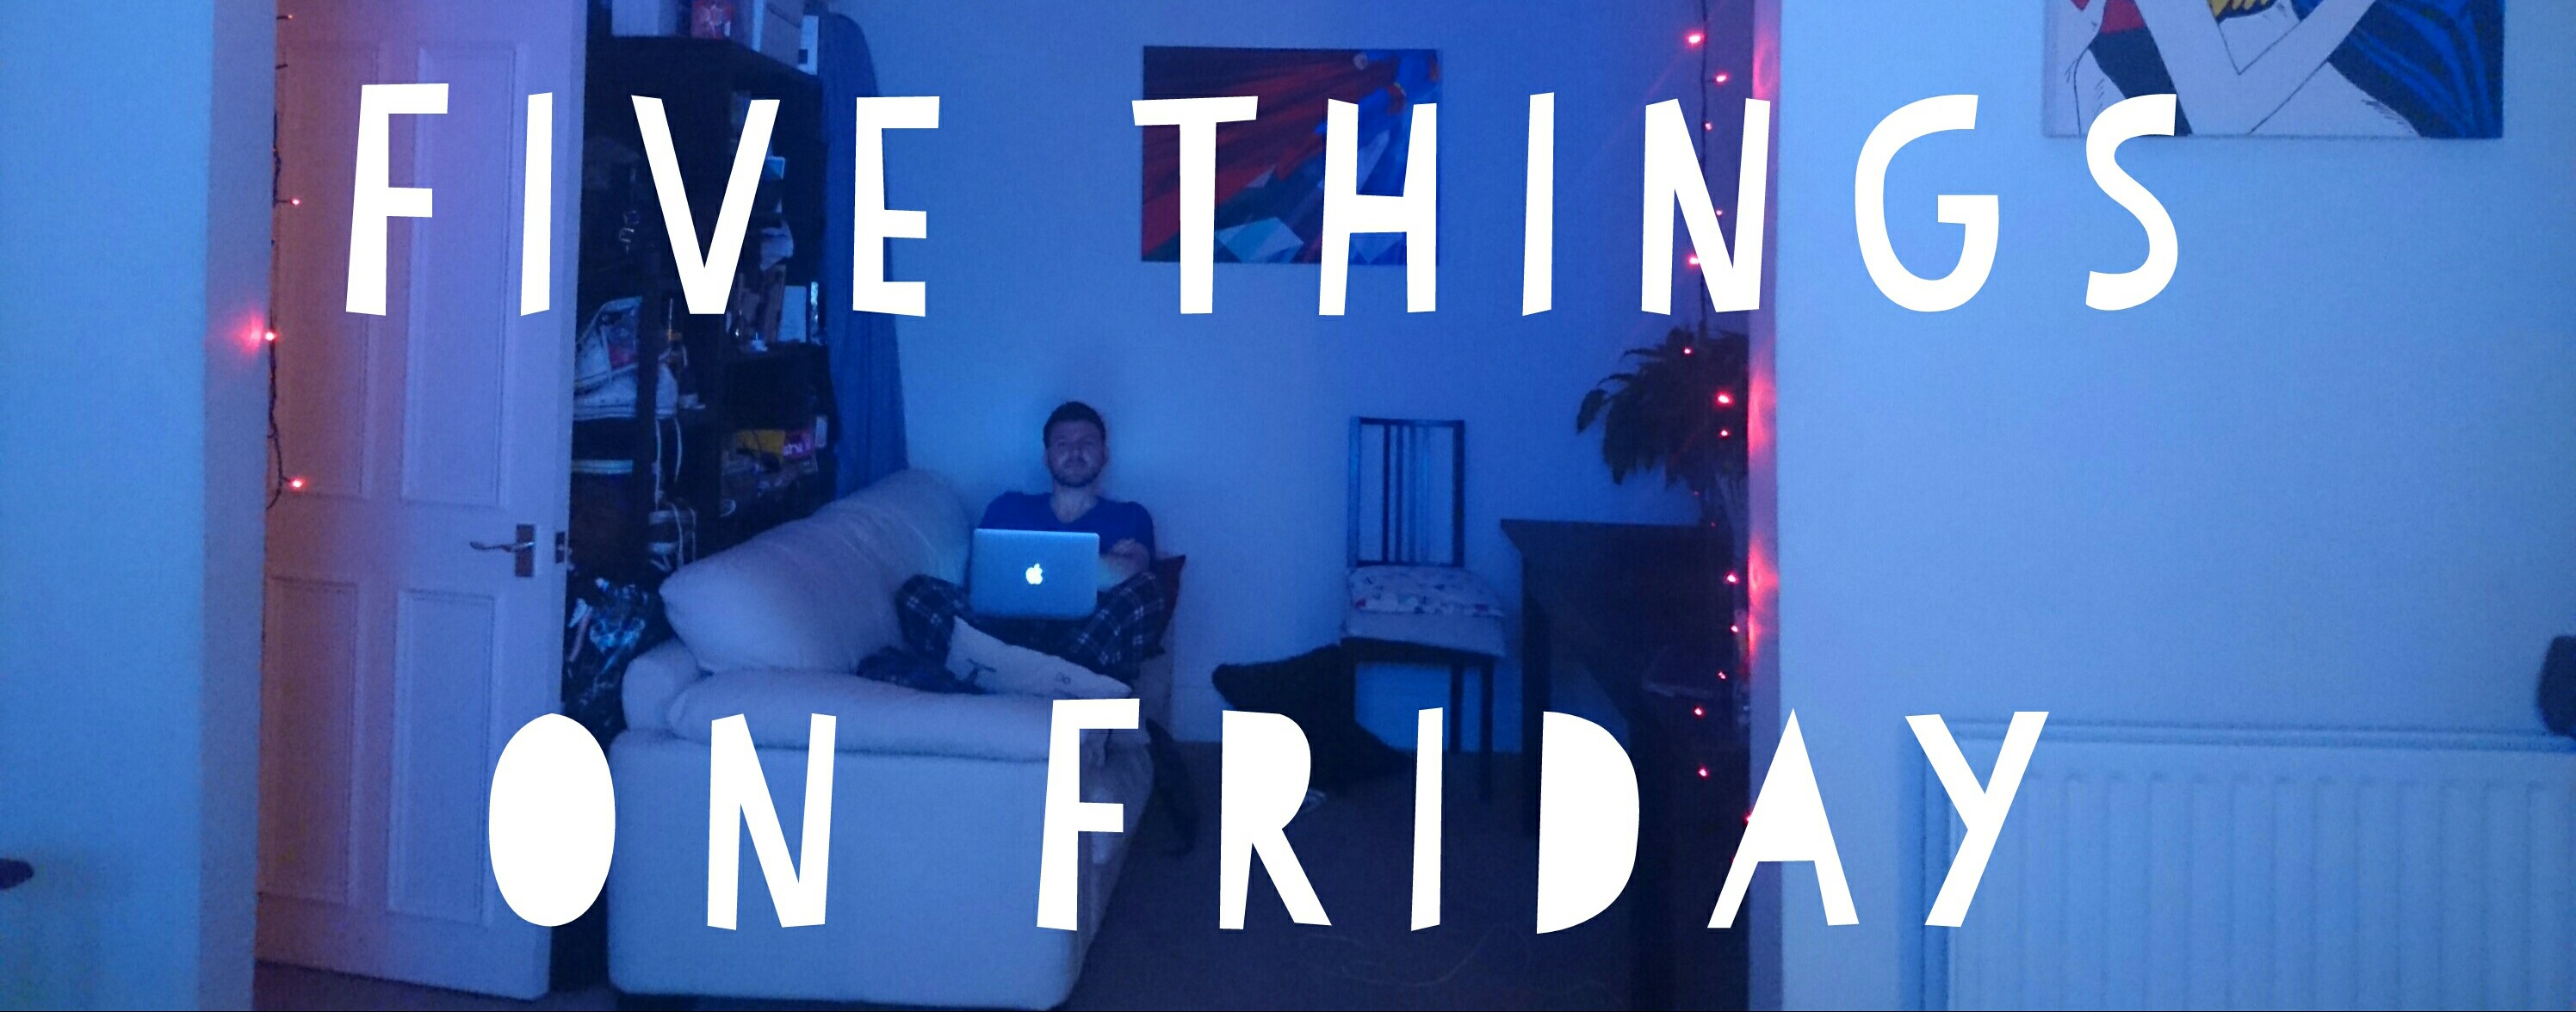 Five things on Friday #150